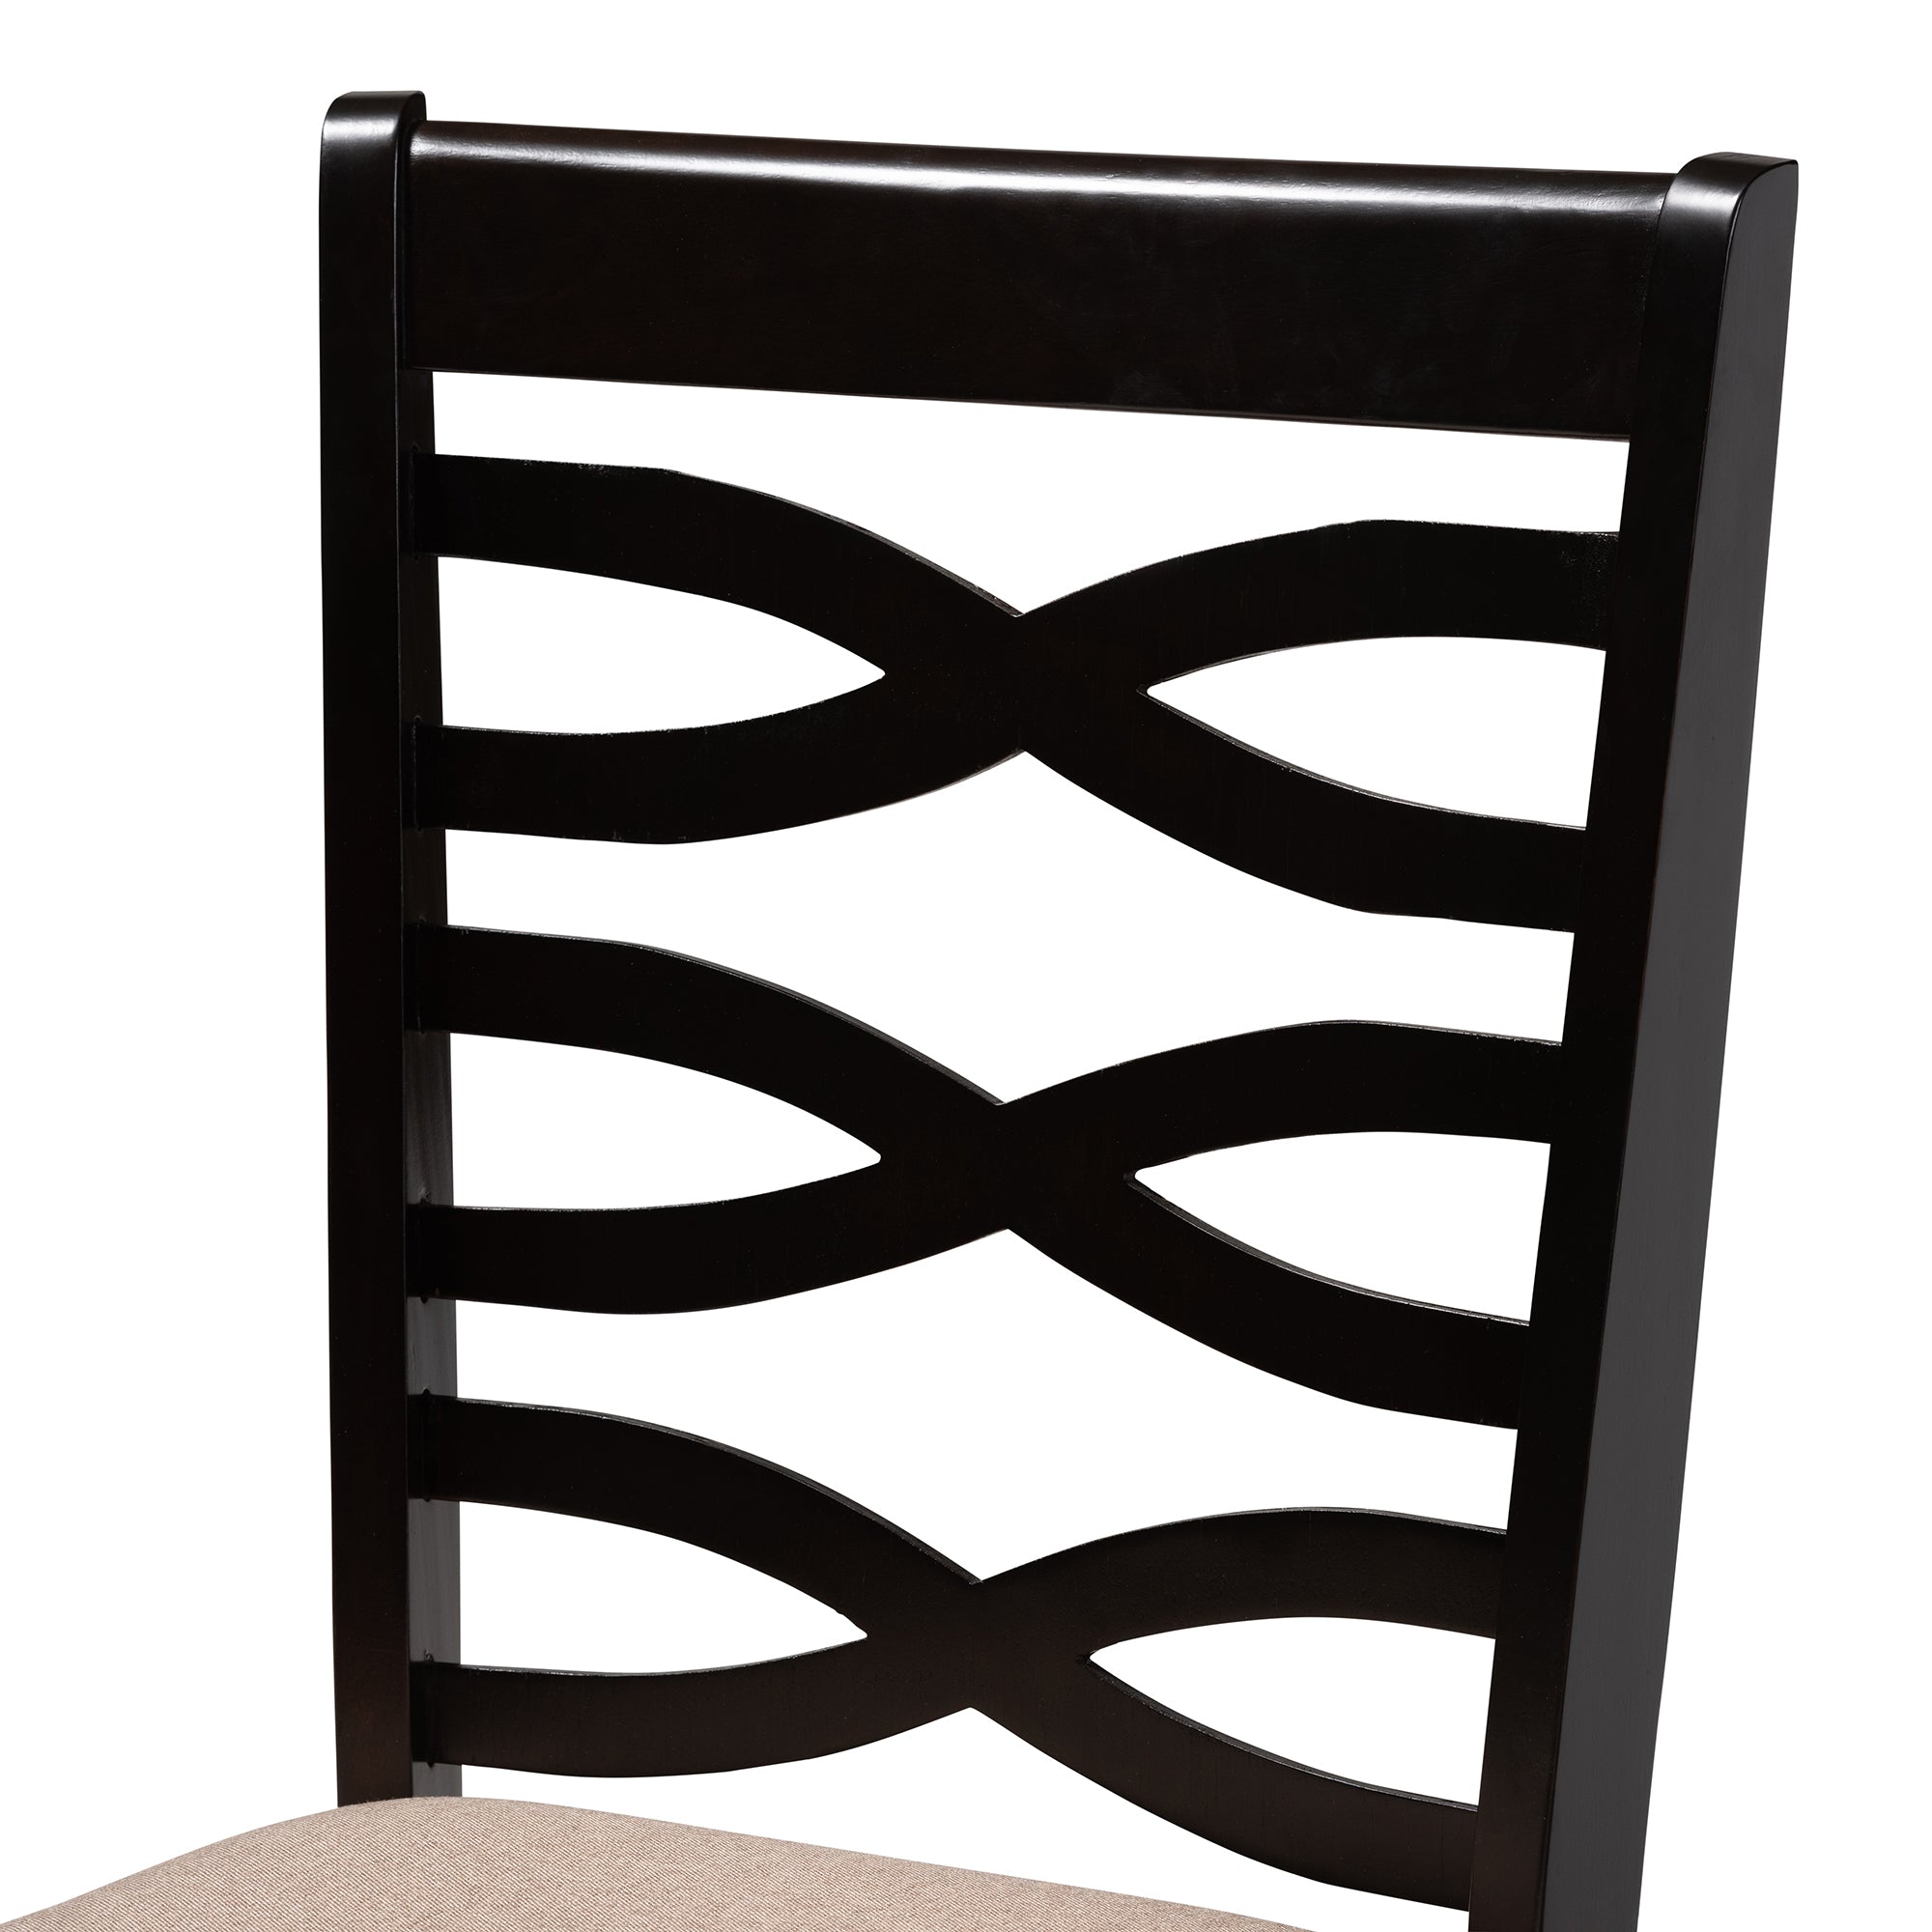 Lanier Contemporary Dining Chairs-Dining Chairs-Baxton Studio - WI-Wall2Wall Furnishings